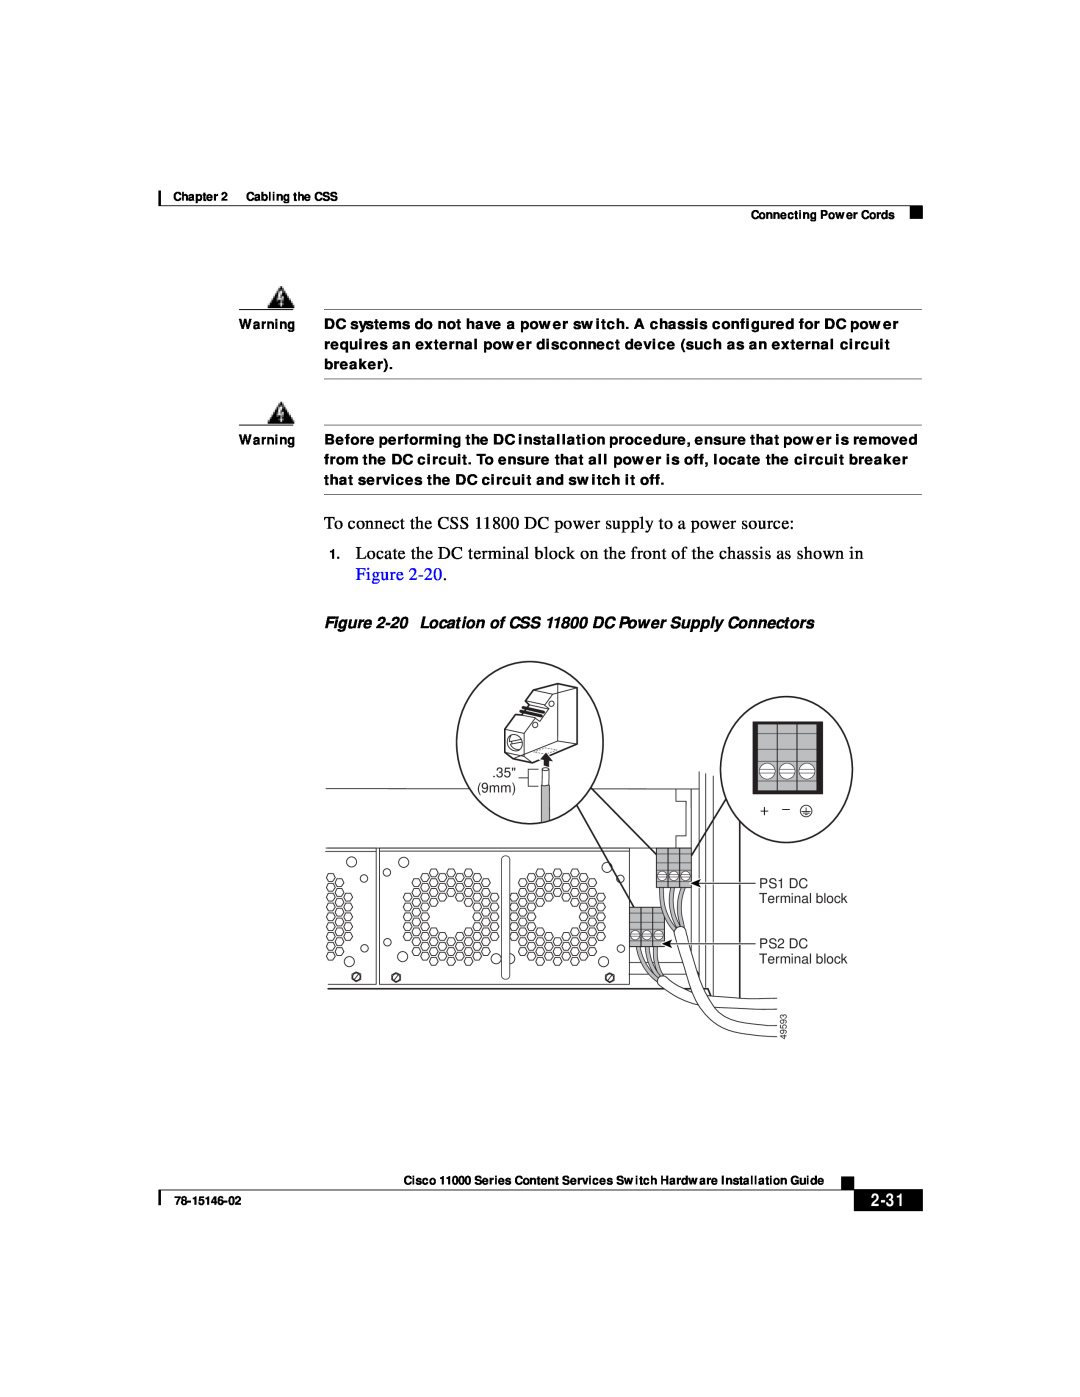 Cisco Systems 11000 Series manual 2-31, 20 Location of CSS 11800 DC Power Supply Connectors 